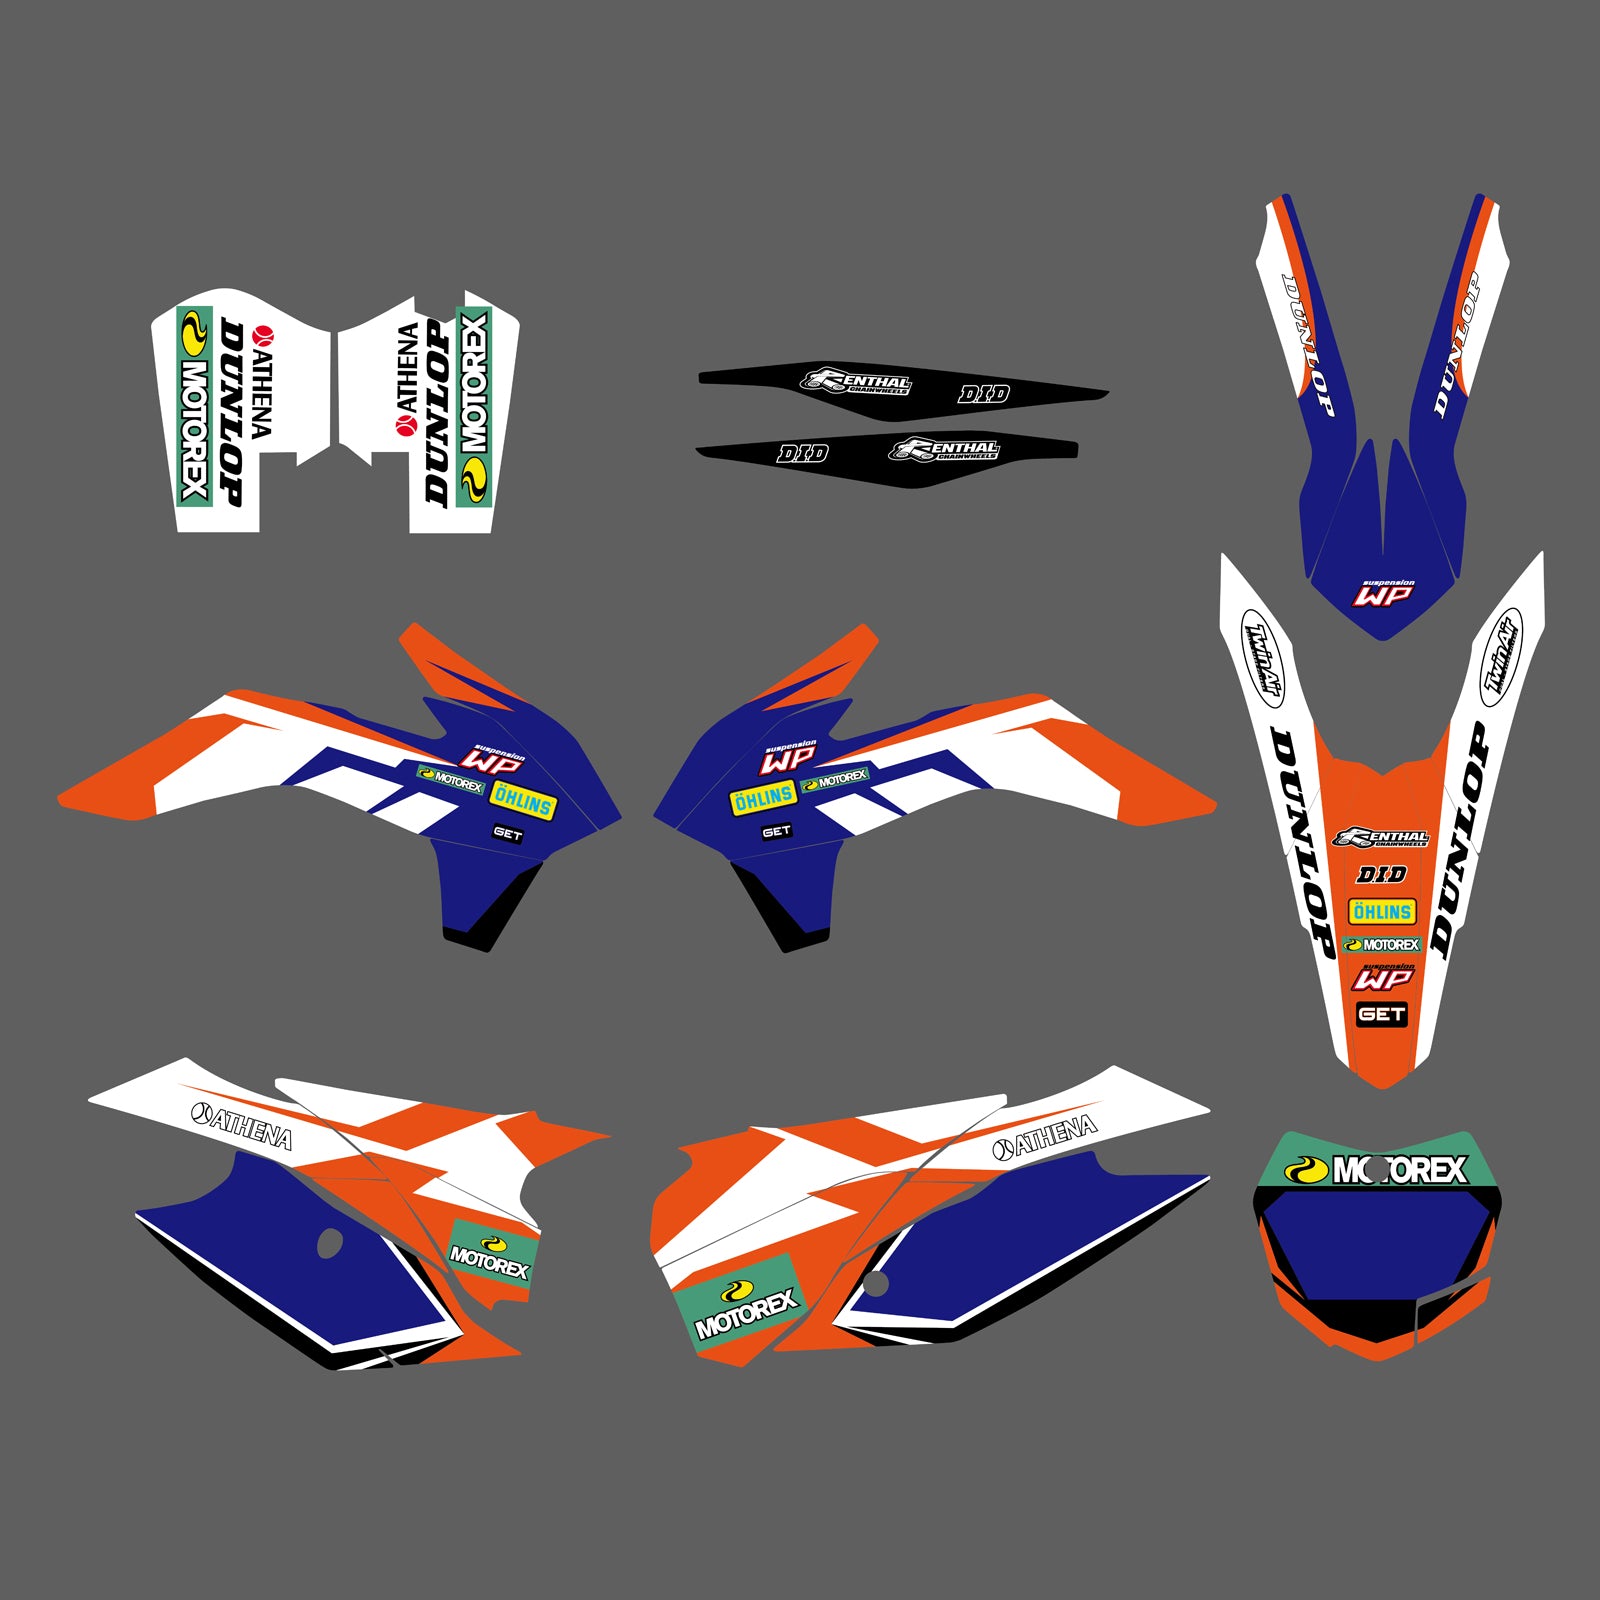 Team Graphics Backgrounds Decals For KTM SX XC 125-450F 13-15 EXC XC-W XCF-W 13-14